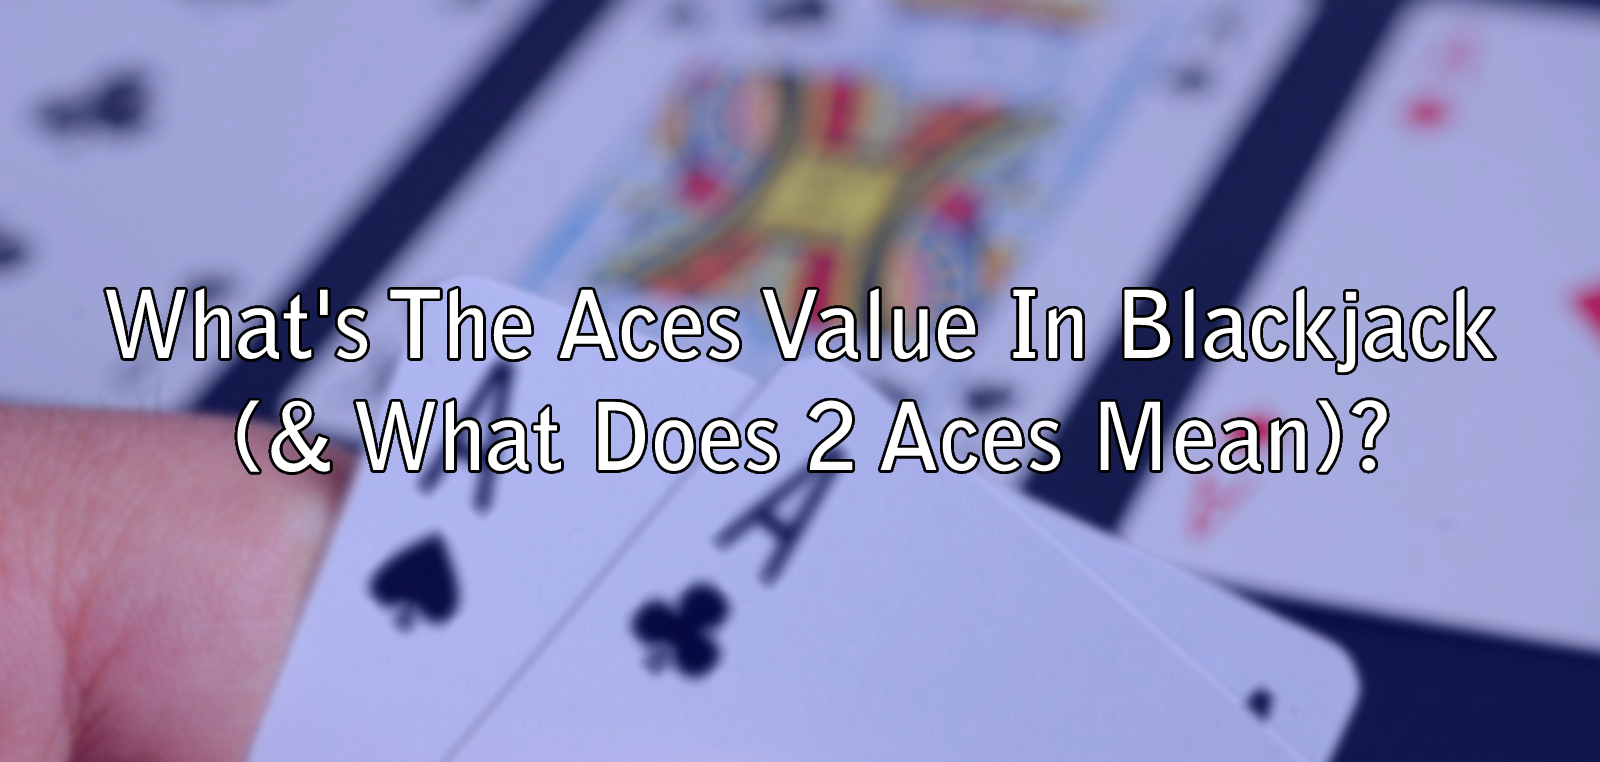 What's The Aces Value In Blackjack (& What Does 2 Aces Mean)?